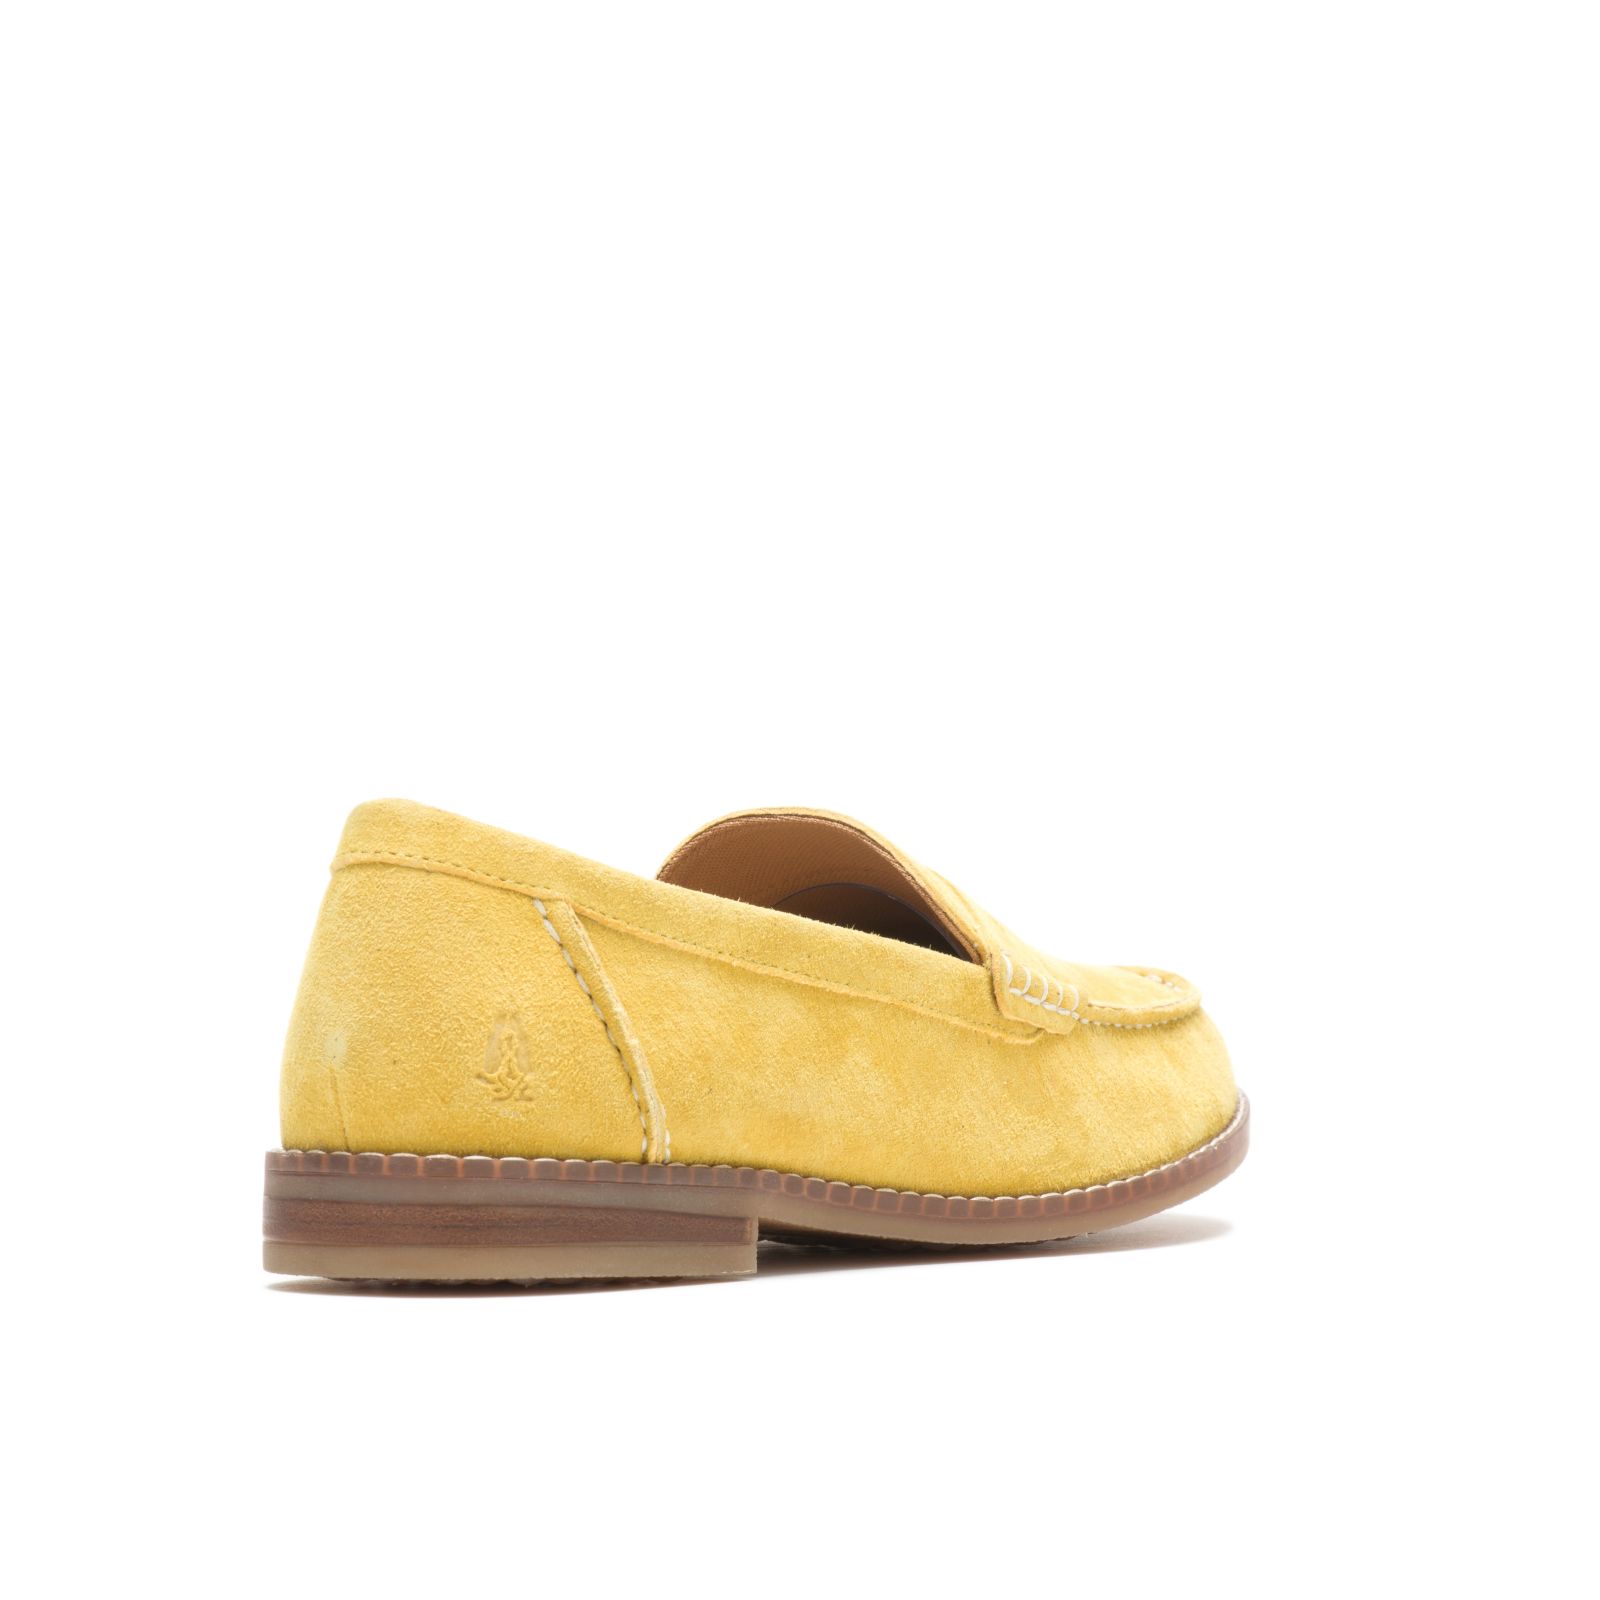 Loafers Hush Puppies Wren Mujer Azules Amarillos Oscuro | BZARXMO-58